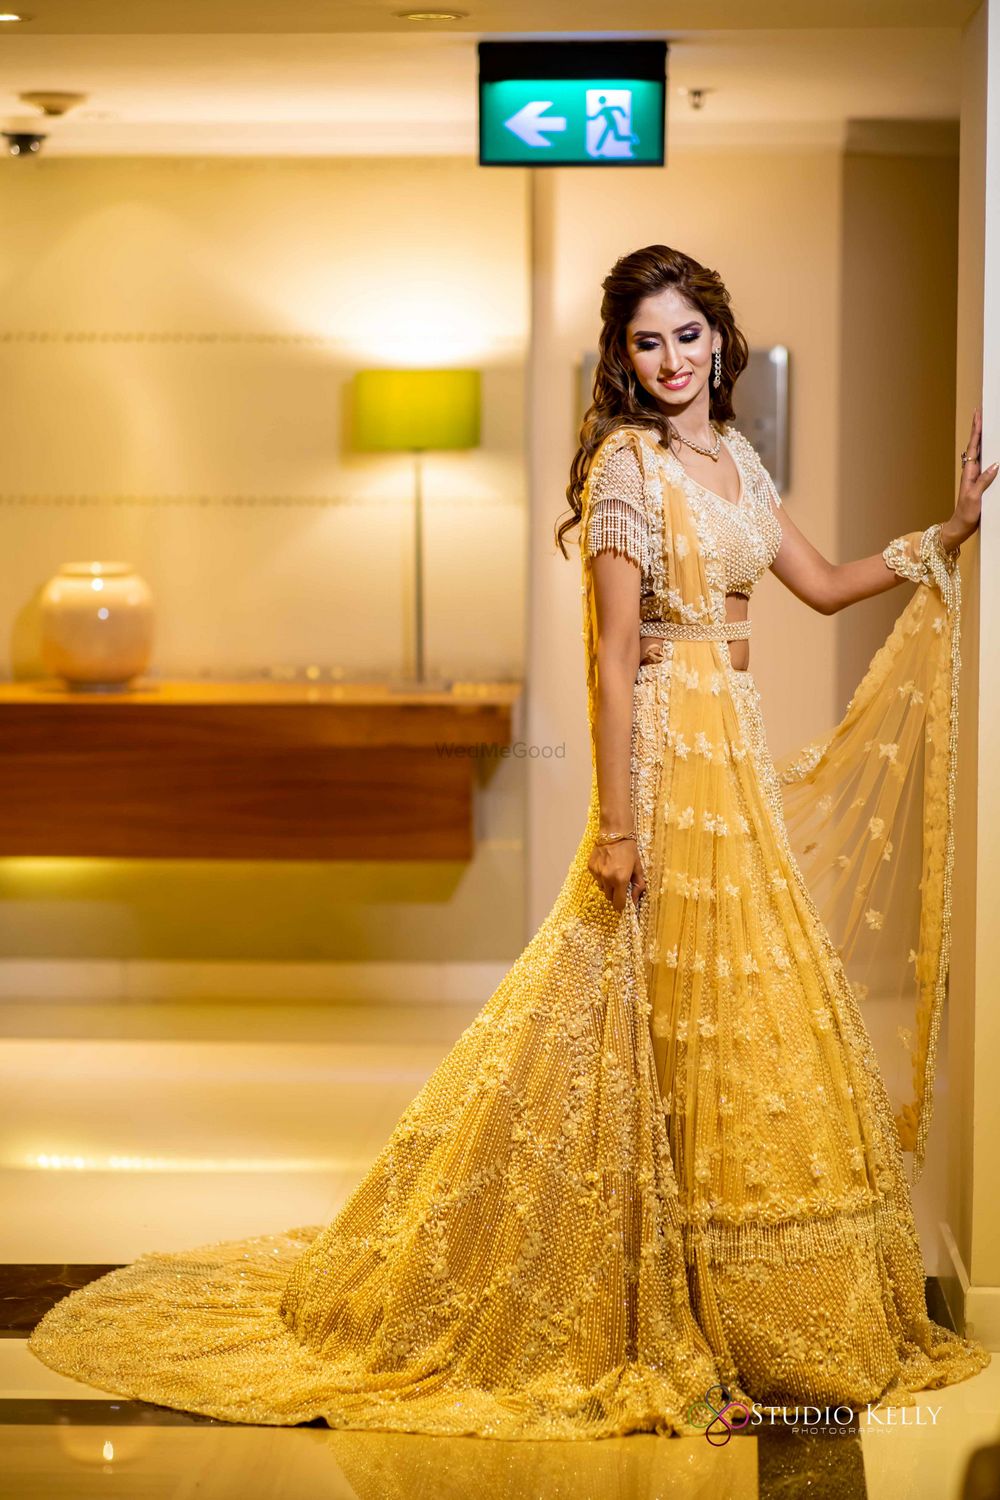 Photo of Bride wearing a yellow lehenga with a tasseled blouse.